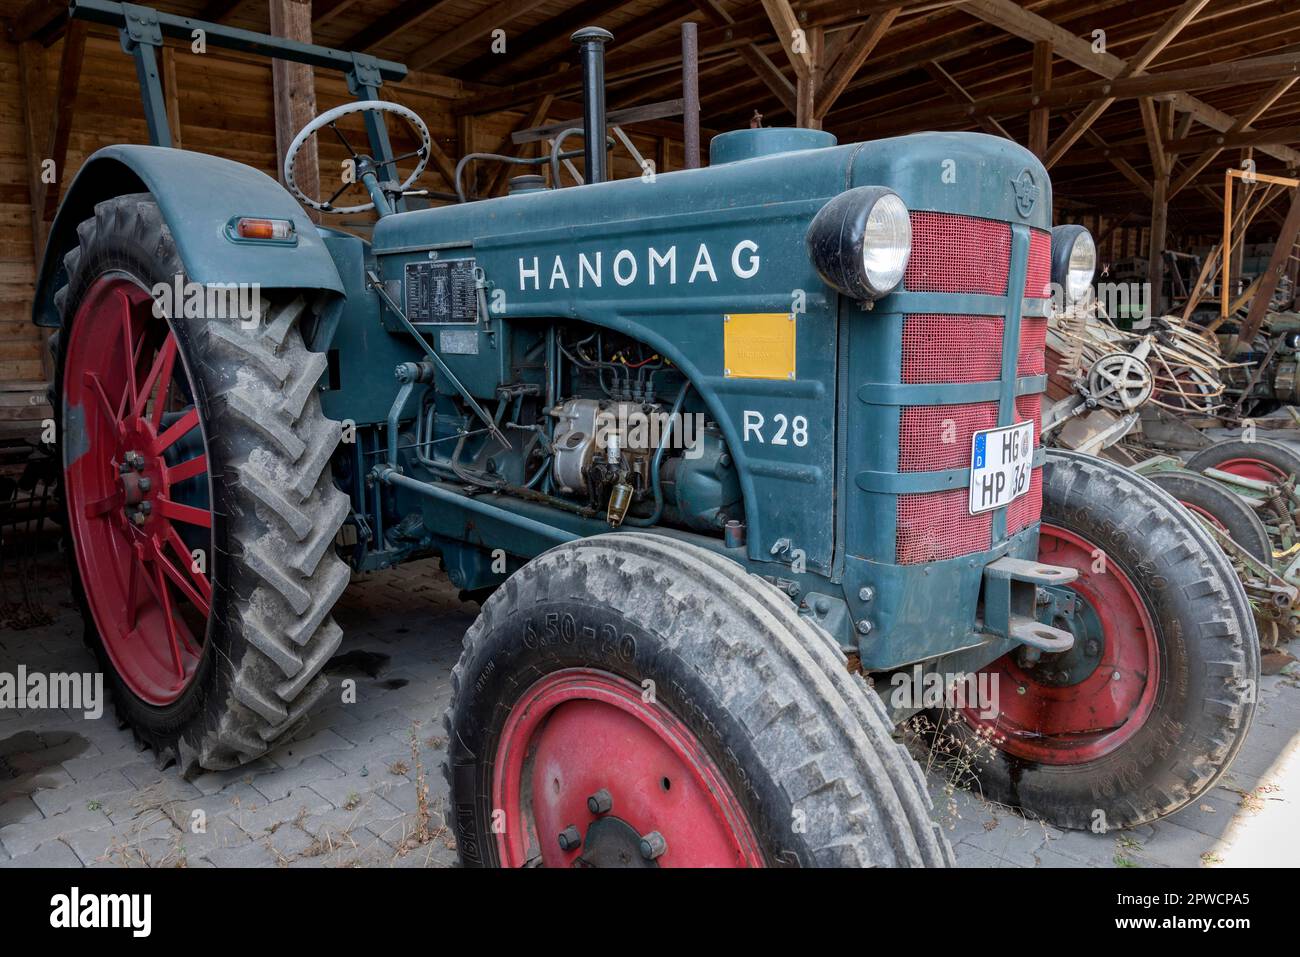 Vintage tractor, Hanomag R28, year of construction 1952, remise, Hessenpark open-air museum, Neu-Anspach, Taunus, Hesse, Germany Stock Photo